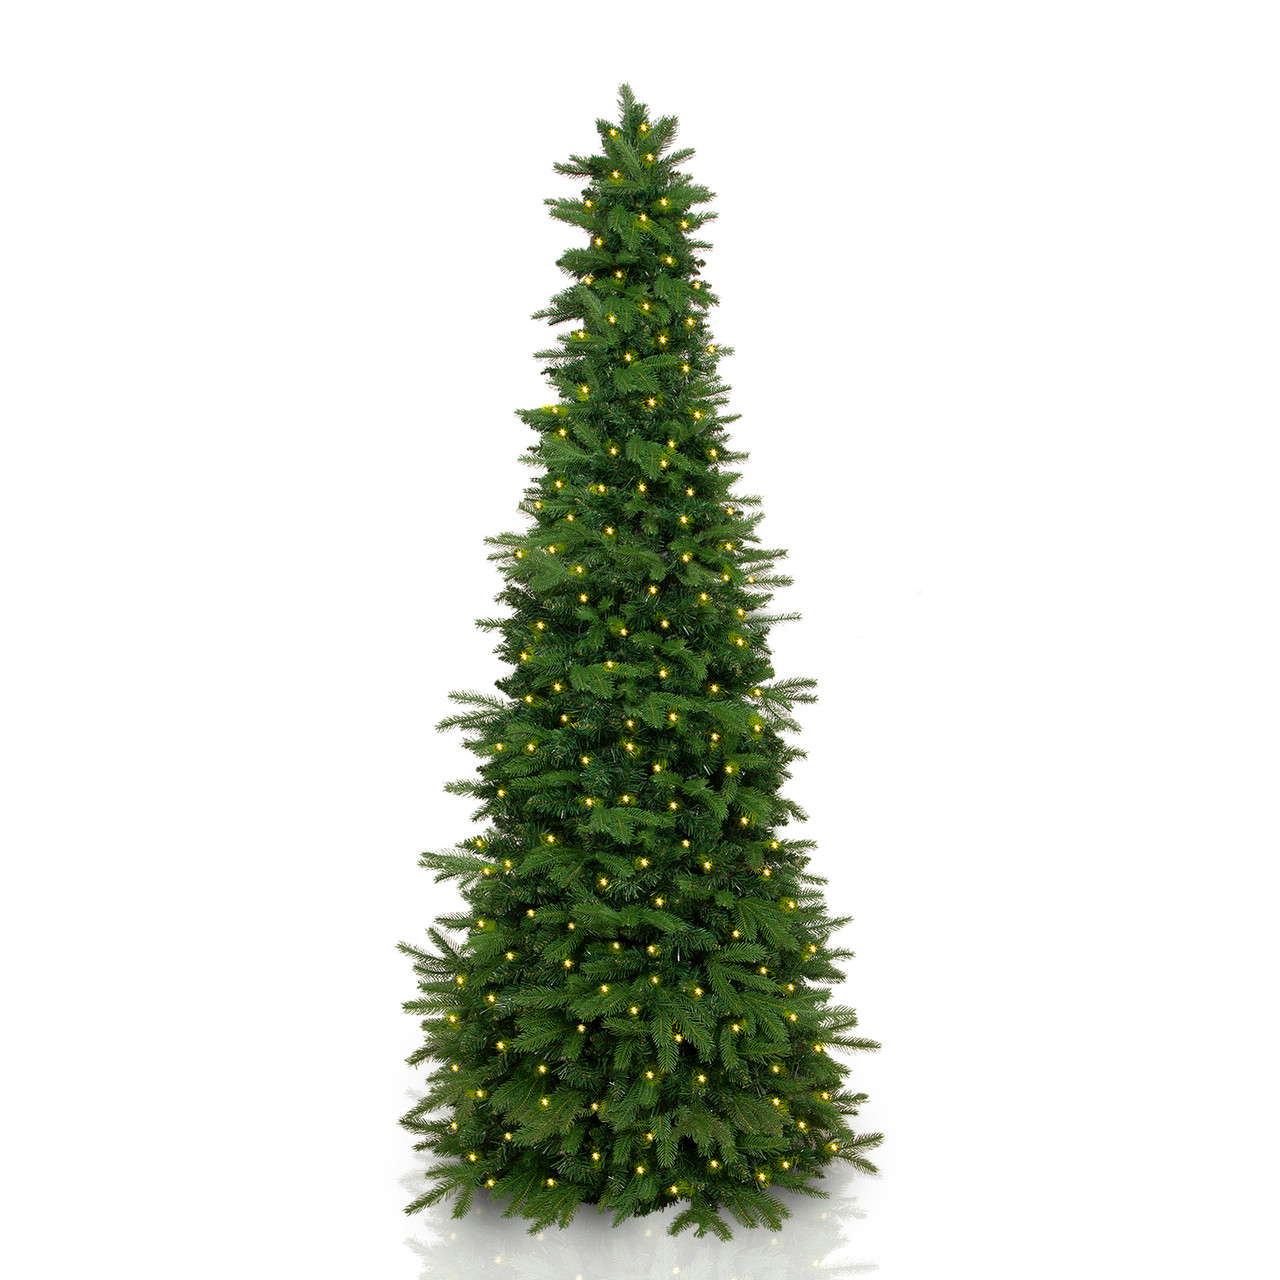 7.5' Pre-Lit LED Monterey Spruce Artificial Christmas Tree, Warm White Lights by Christmas Central